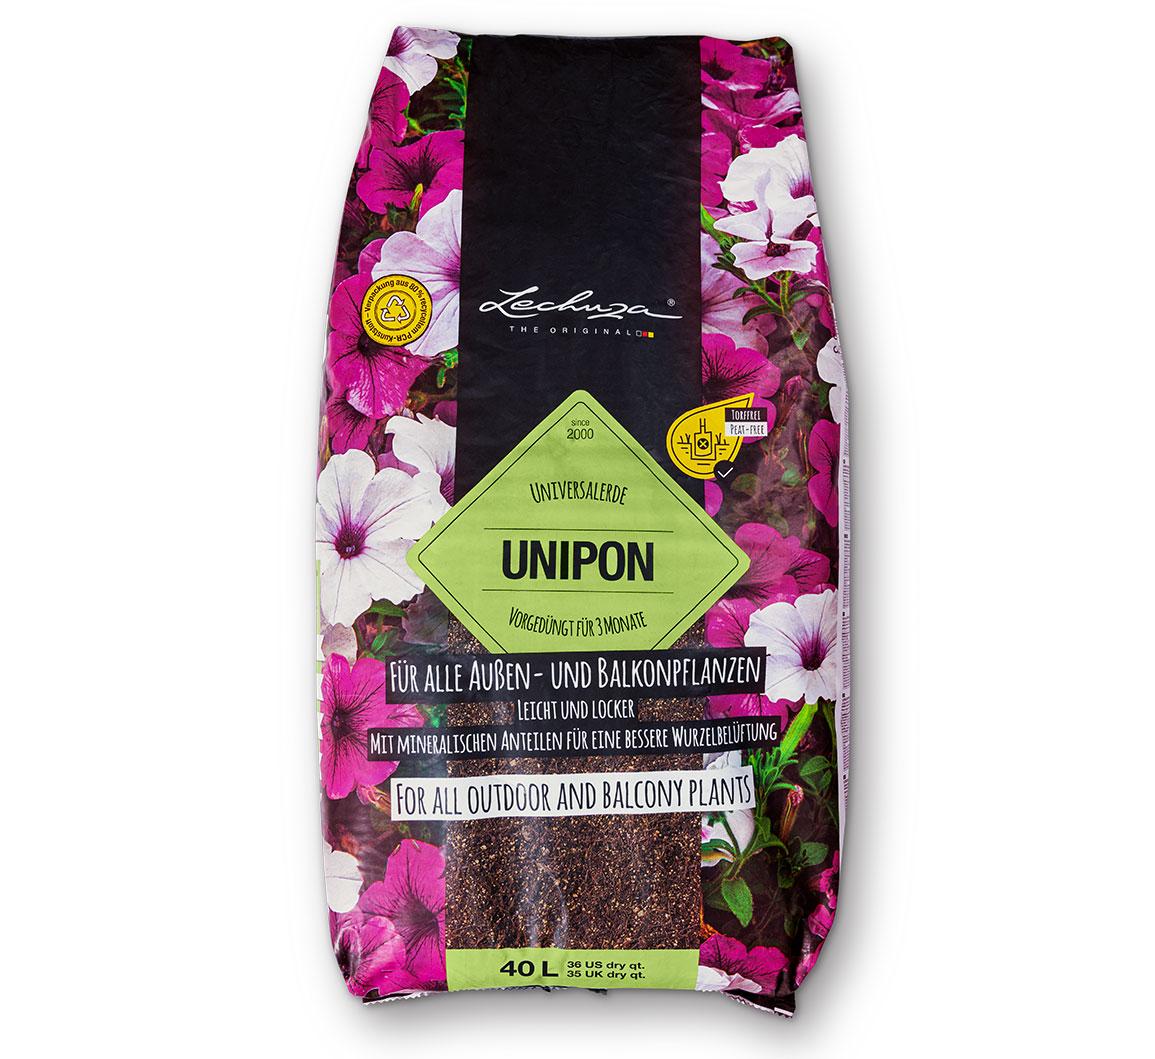 UNIPON: For outdoor and balcony plants